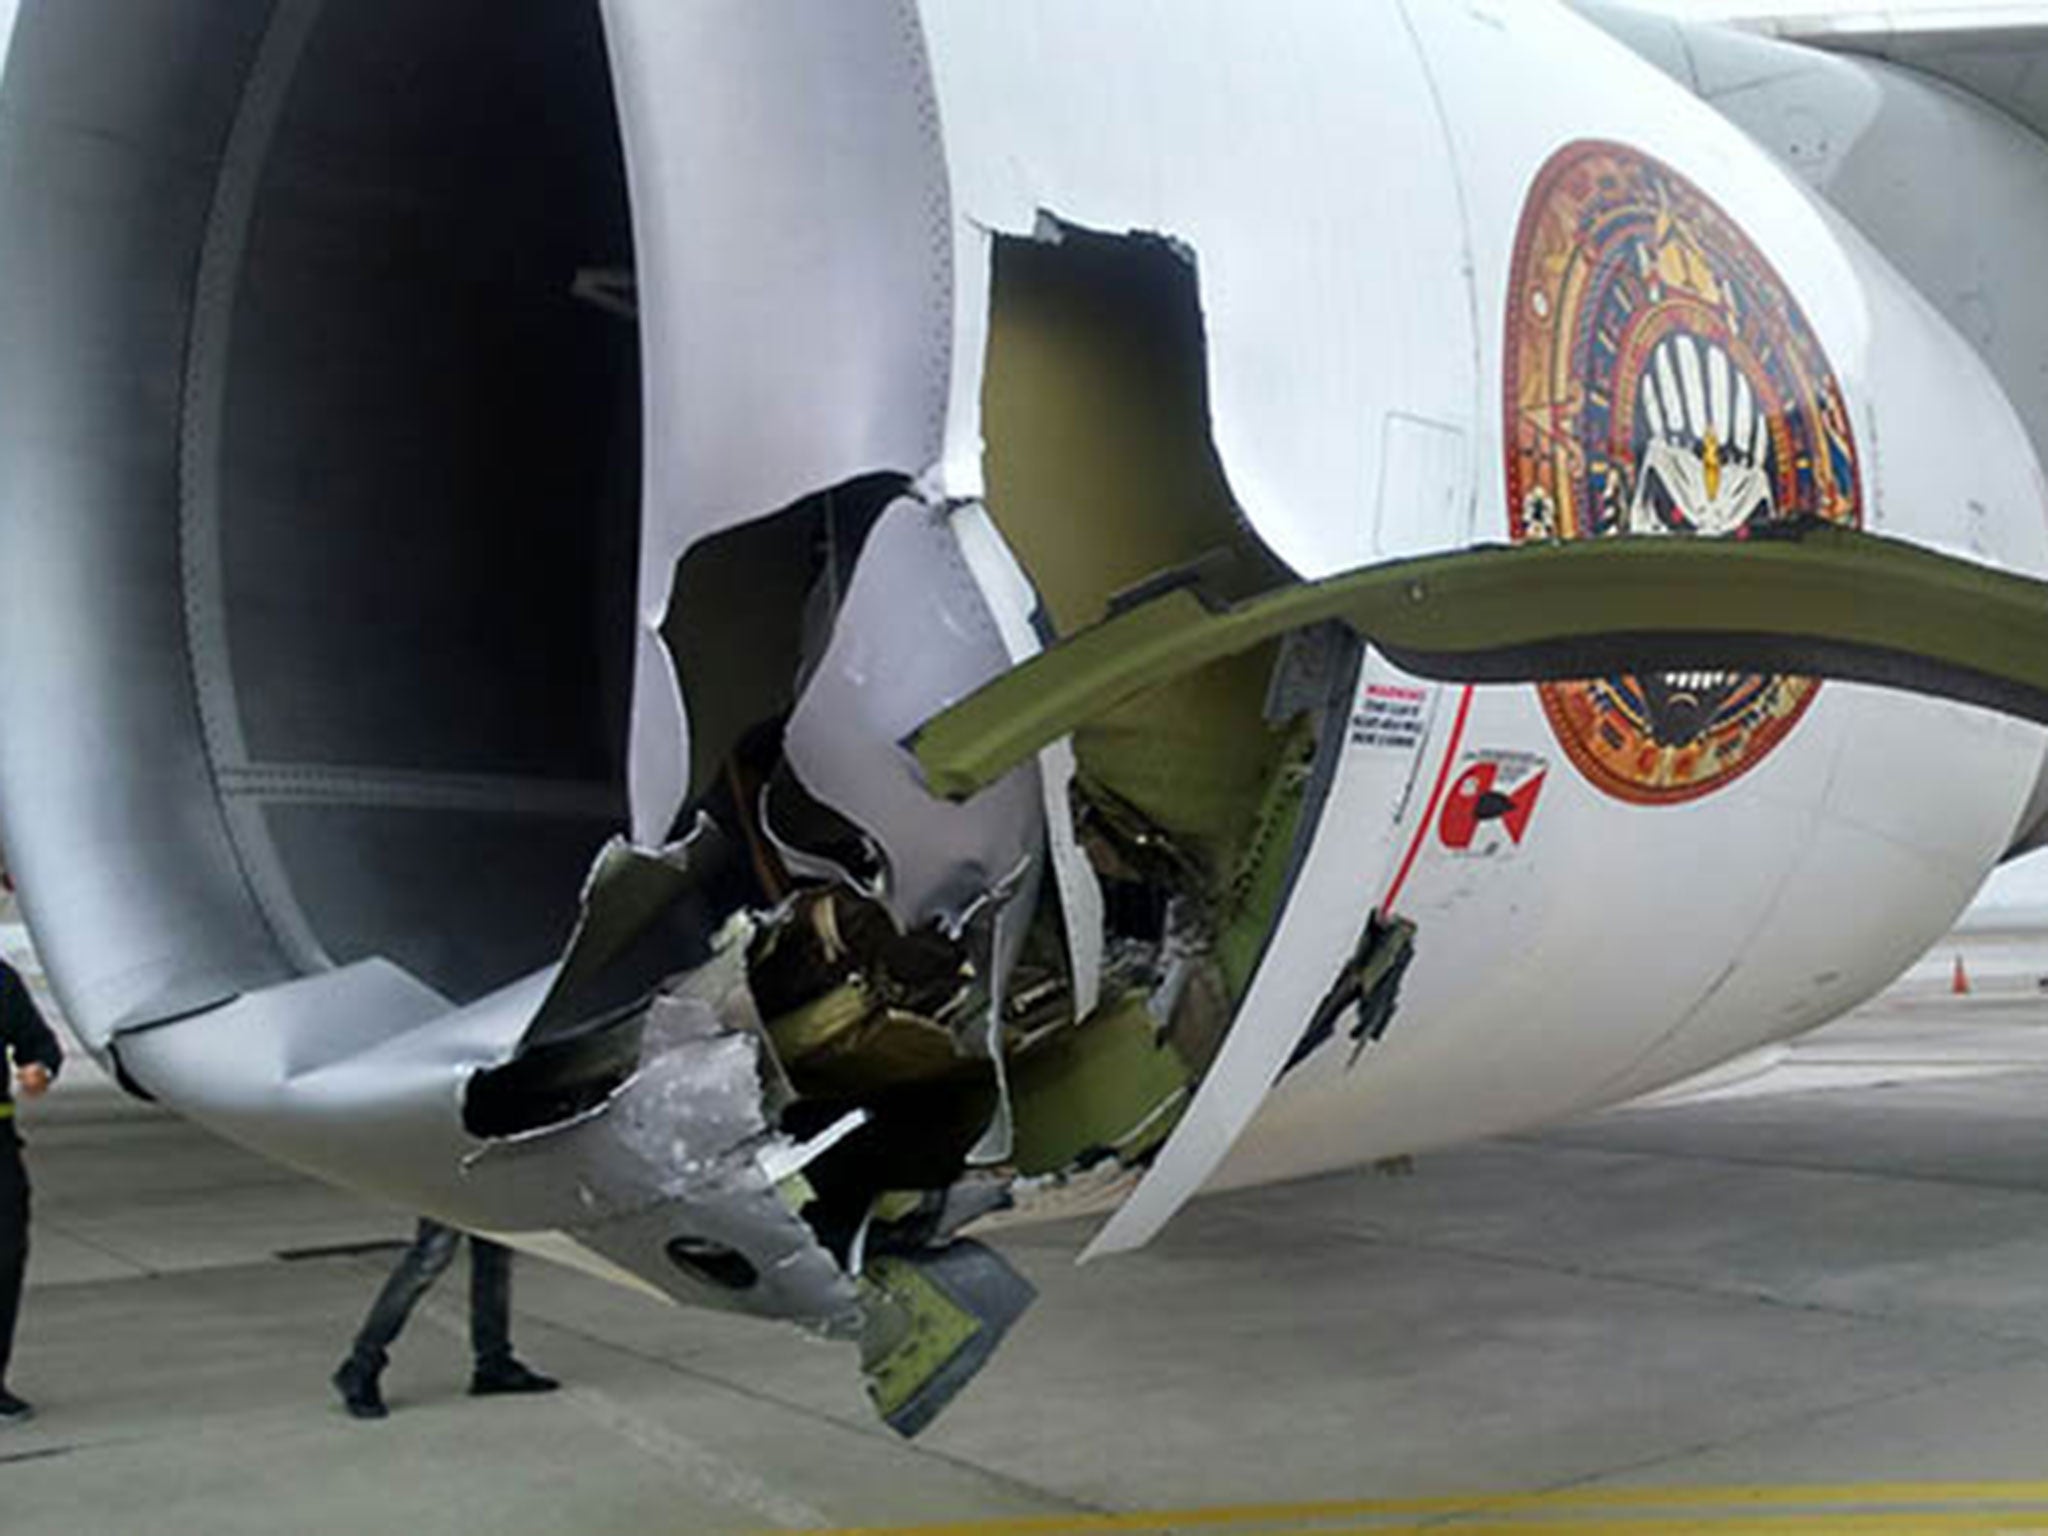 The Boeing 747's undercarriage and two of its engines were damaged in the collision